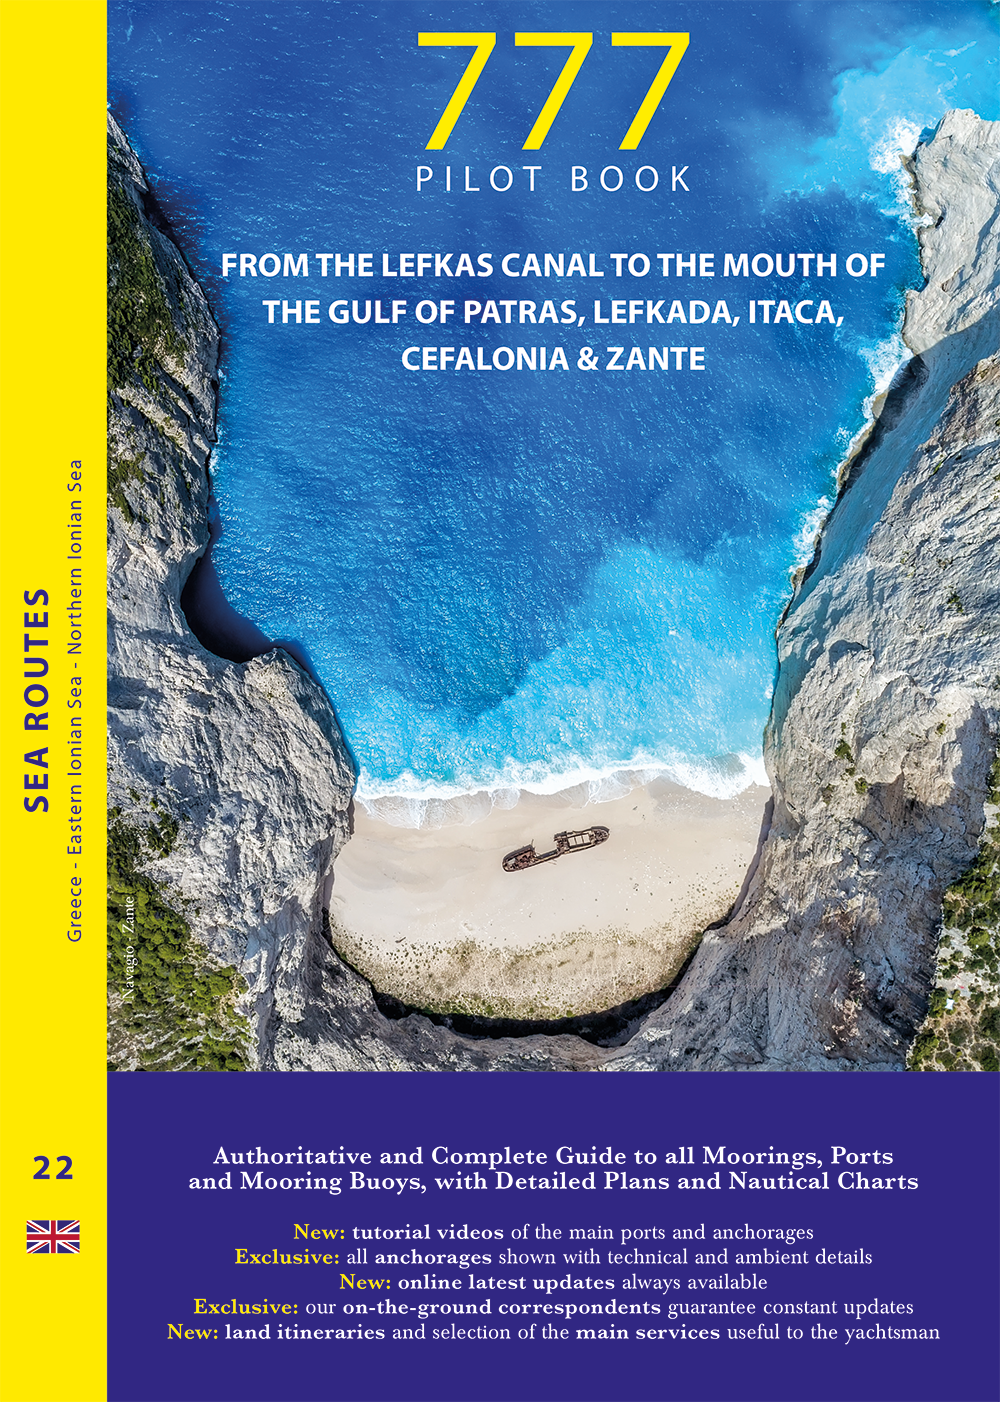 From the Lefkas Canal to the Mouth of the Gulf of Patras, Lefkada, Itaca, Cefalonia & Zante